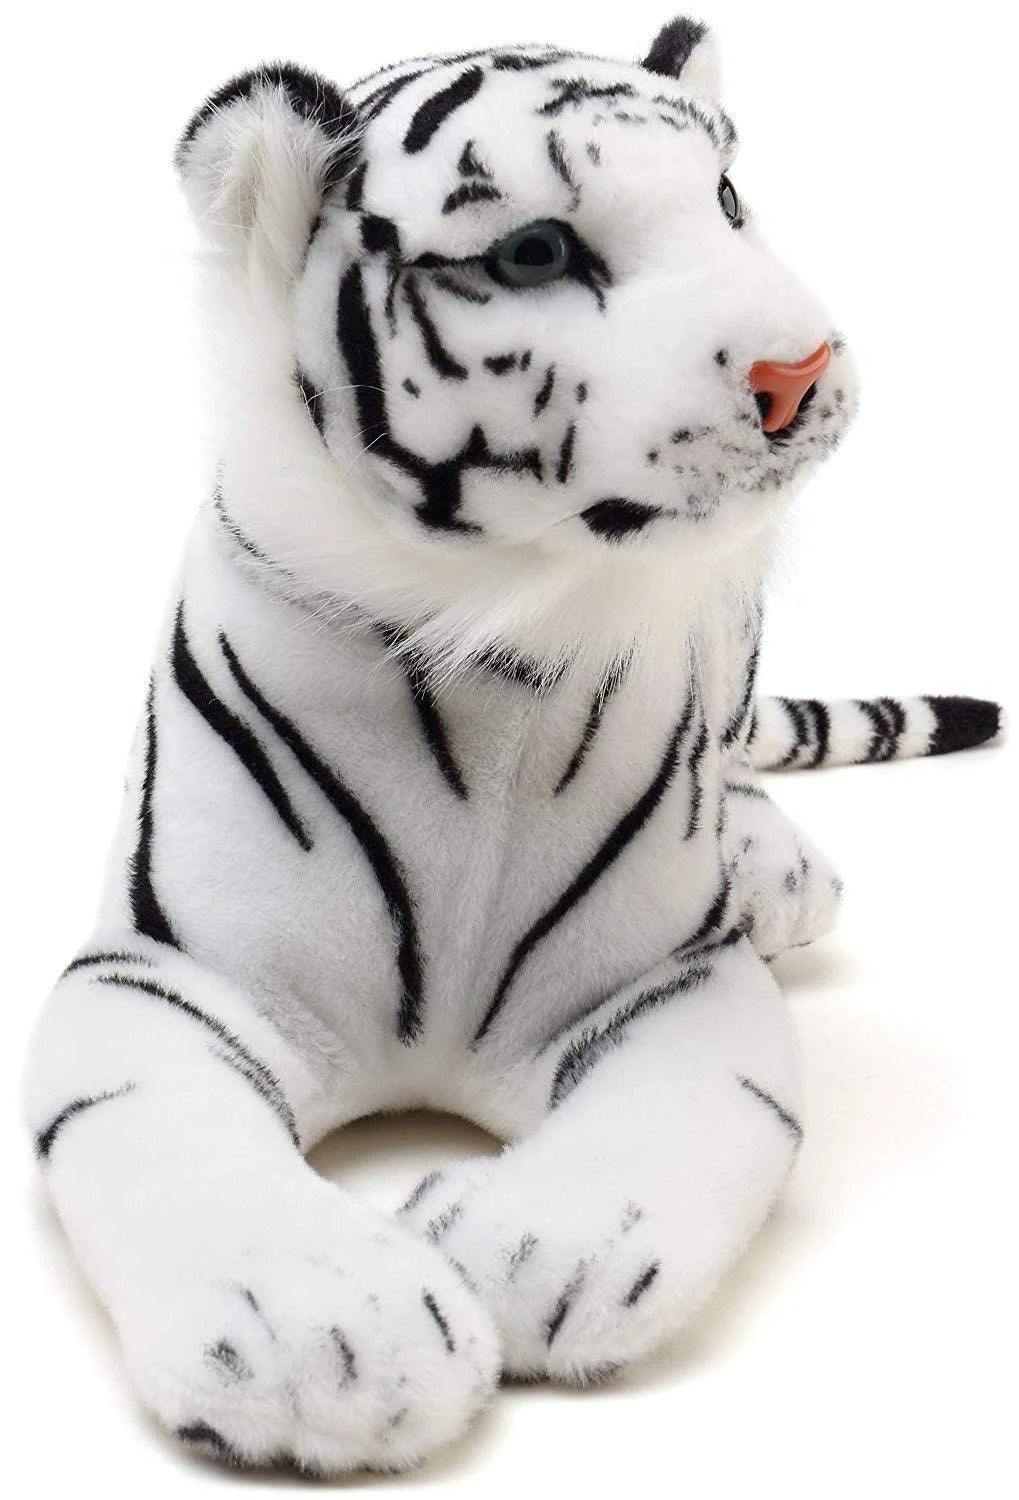 Buy White Tiger Giant Stuffed Animal Plush Toy for 20.39 USD | Way Up Gifts